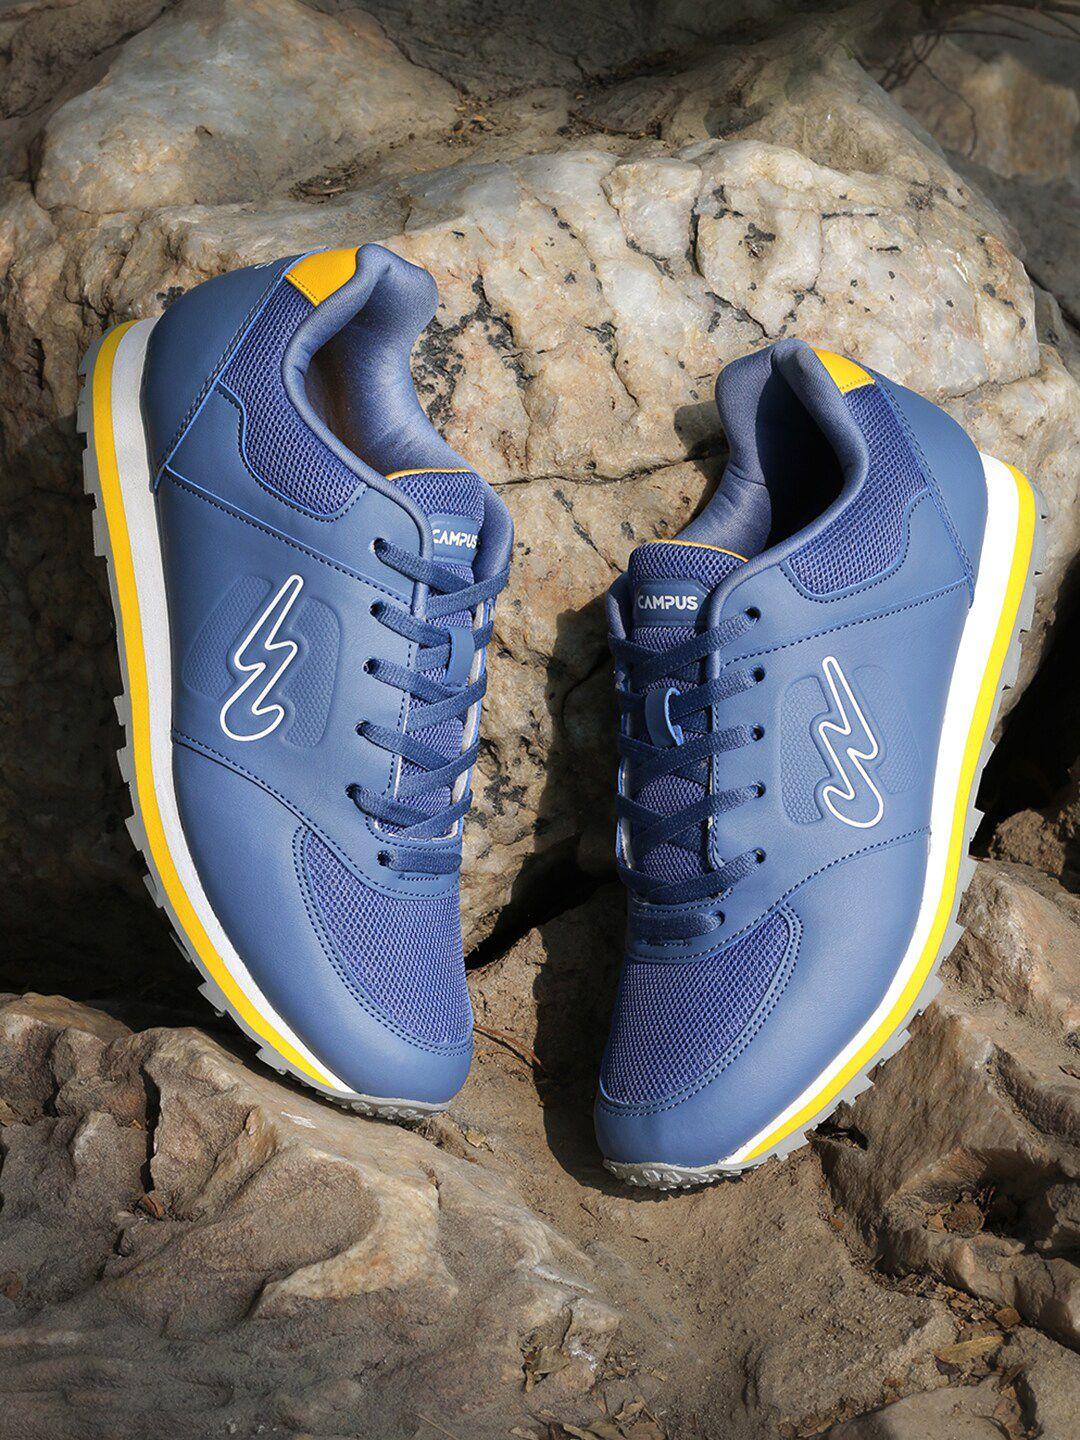 campus men hilltop lace-up running shoes